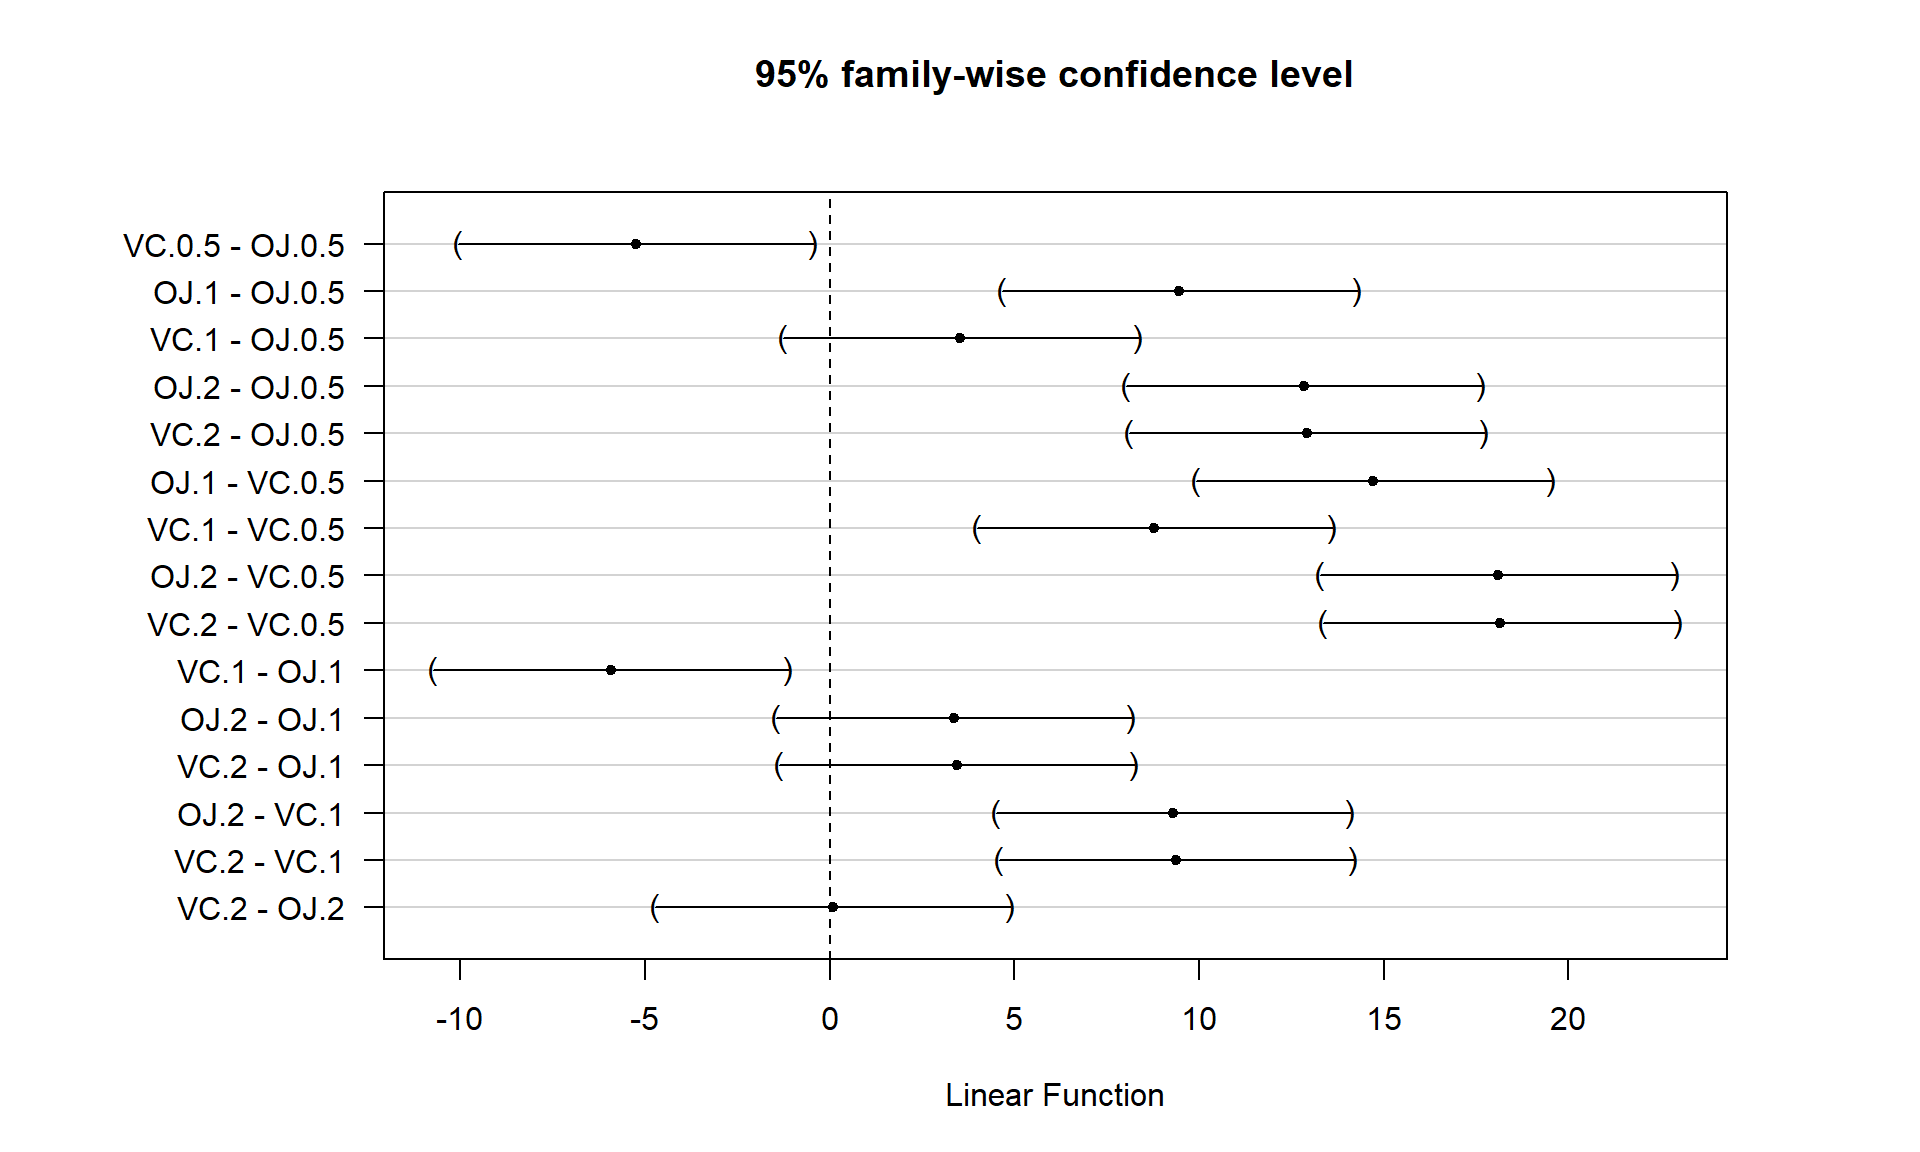 Graphical display of pair-wise comparisons from Tukey’s HSD for the Guinea Pig data. Any confidence intervals that do not contain 0 provide strong evidence against the null hypothesis of no difference in the true means for that pair of groups.